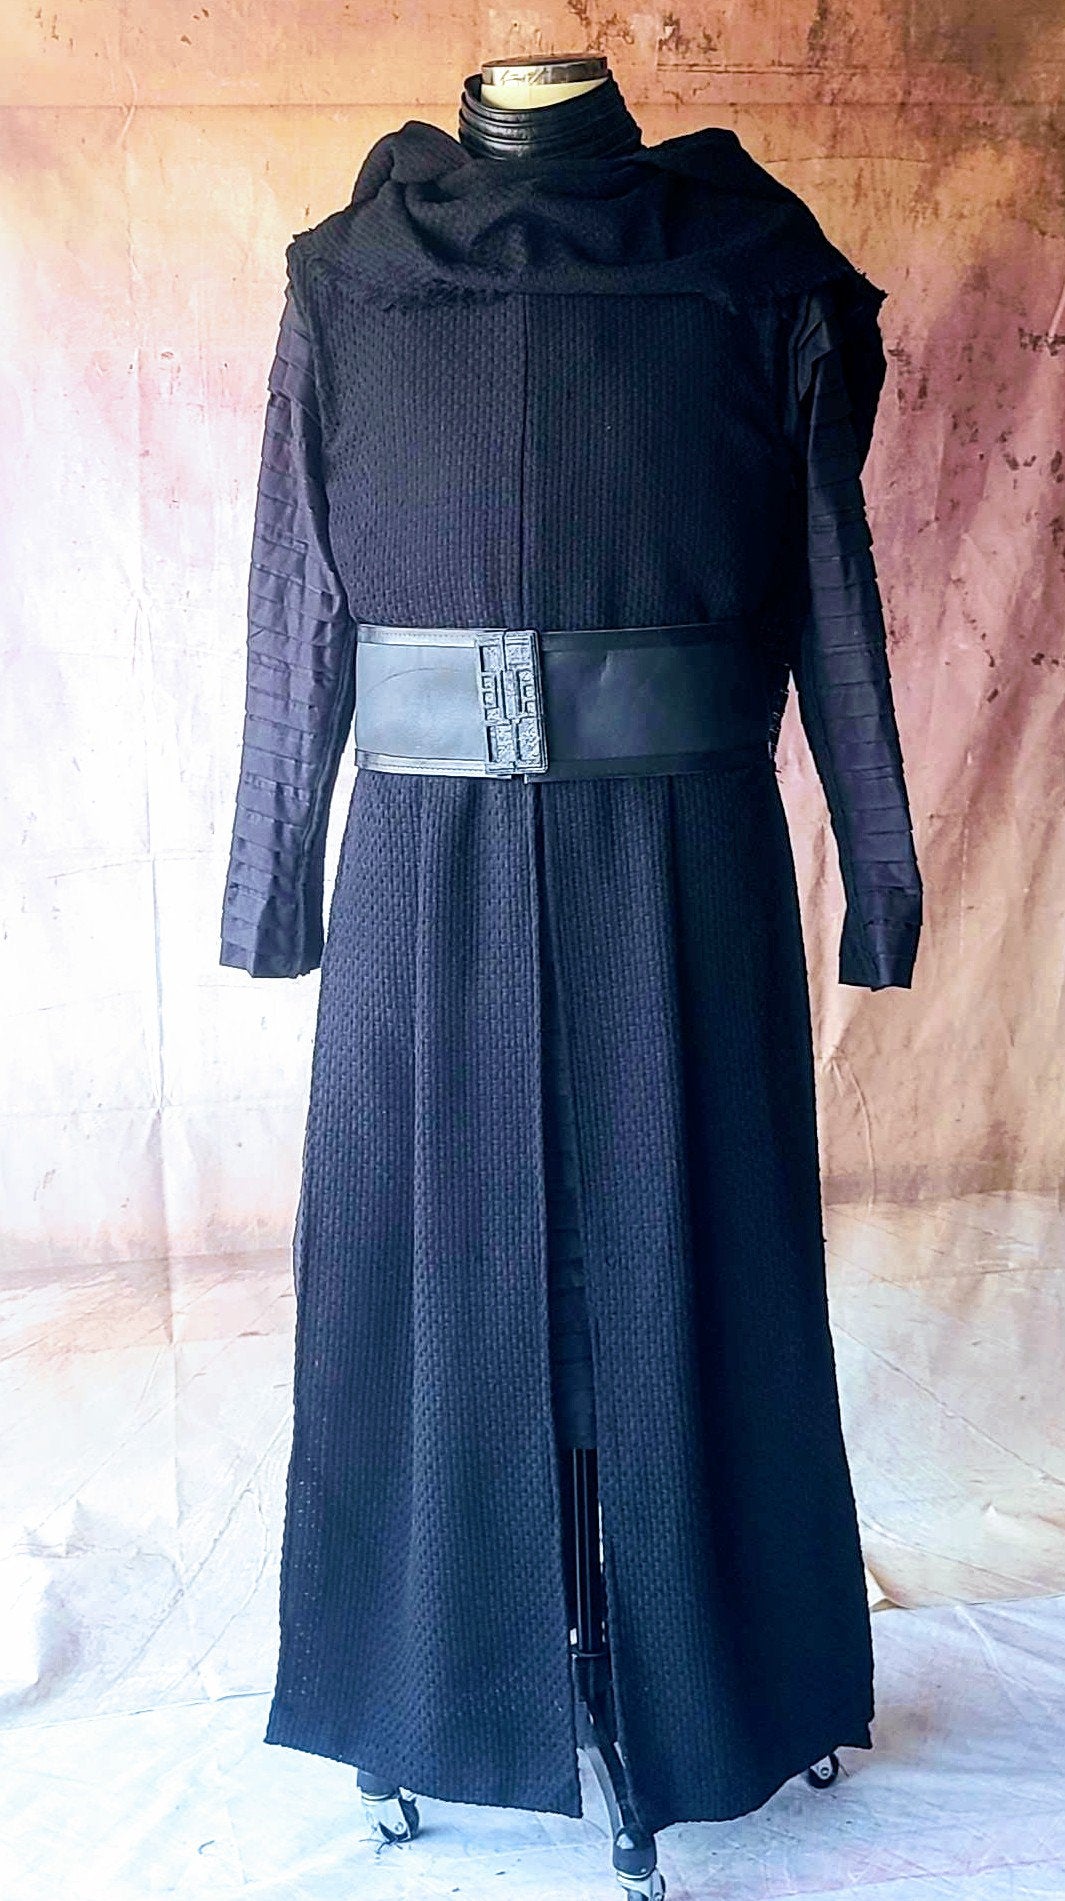 Kylo Ren inspired costume Star Wars Cape Cowl and Hood approval